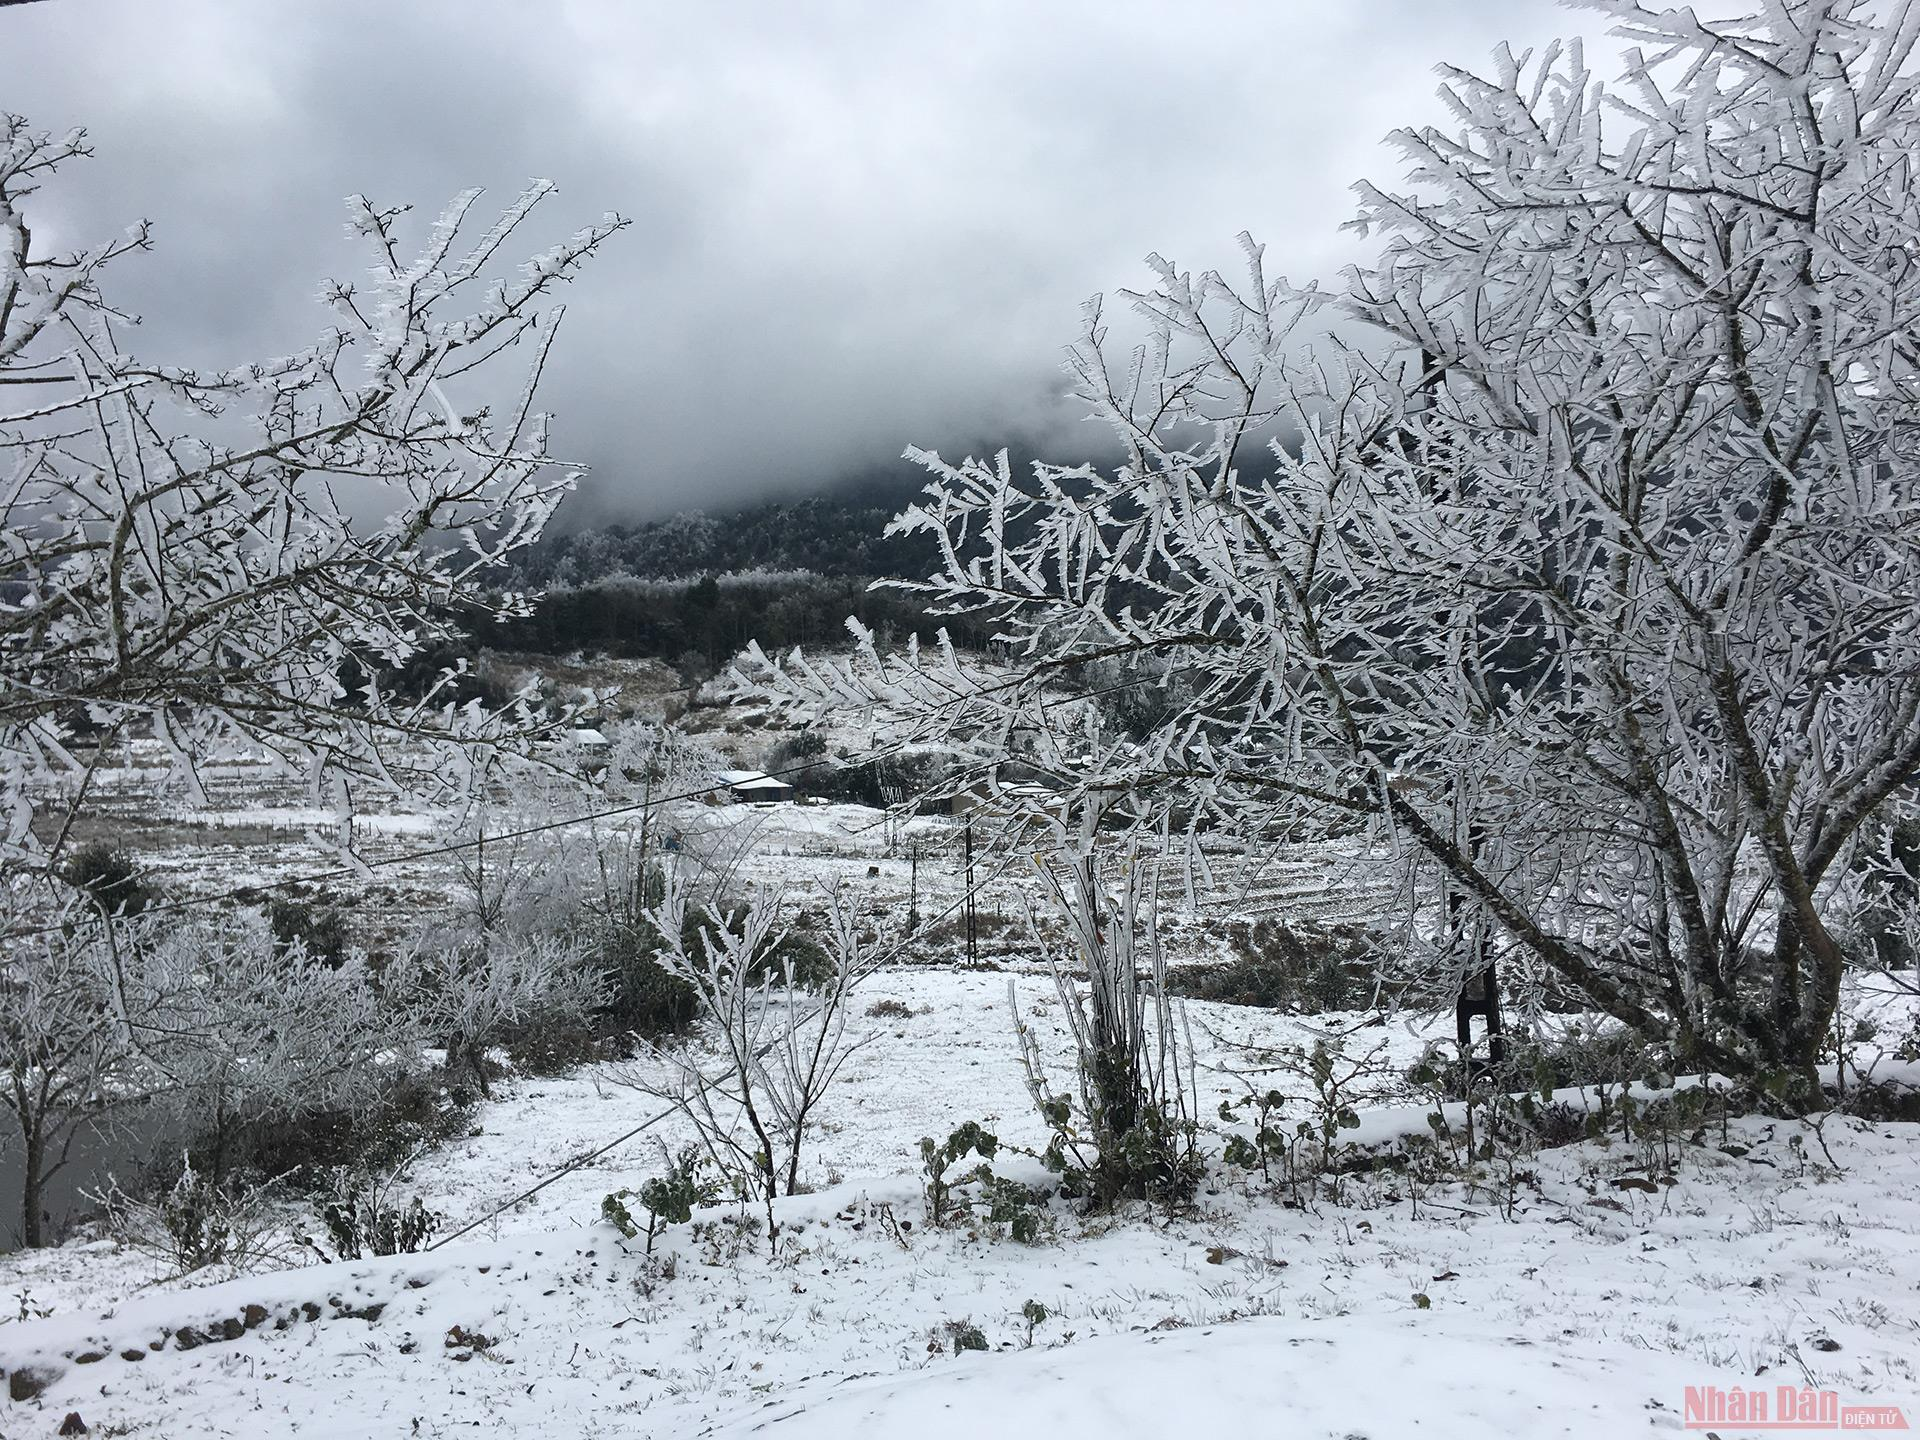 Northern Vietnam mountains engulfed in white snow